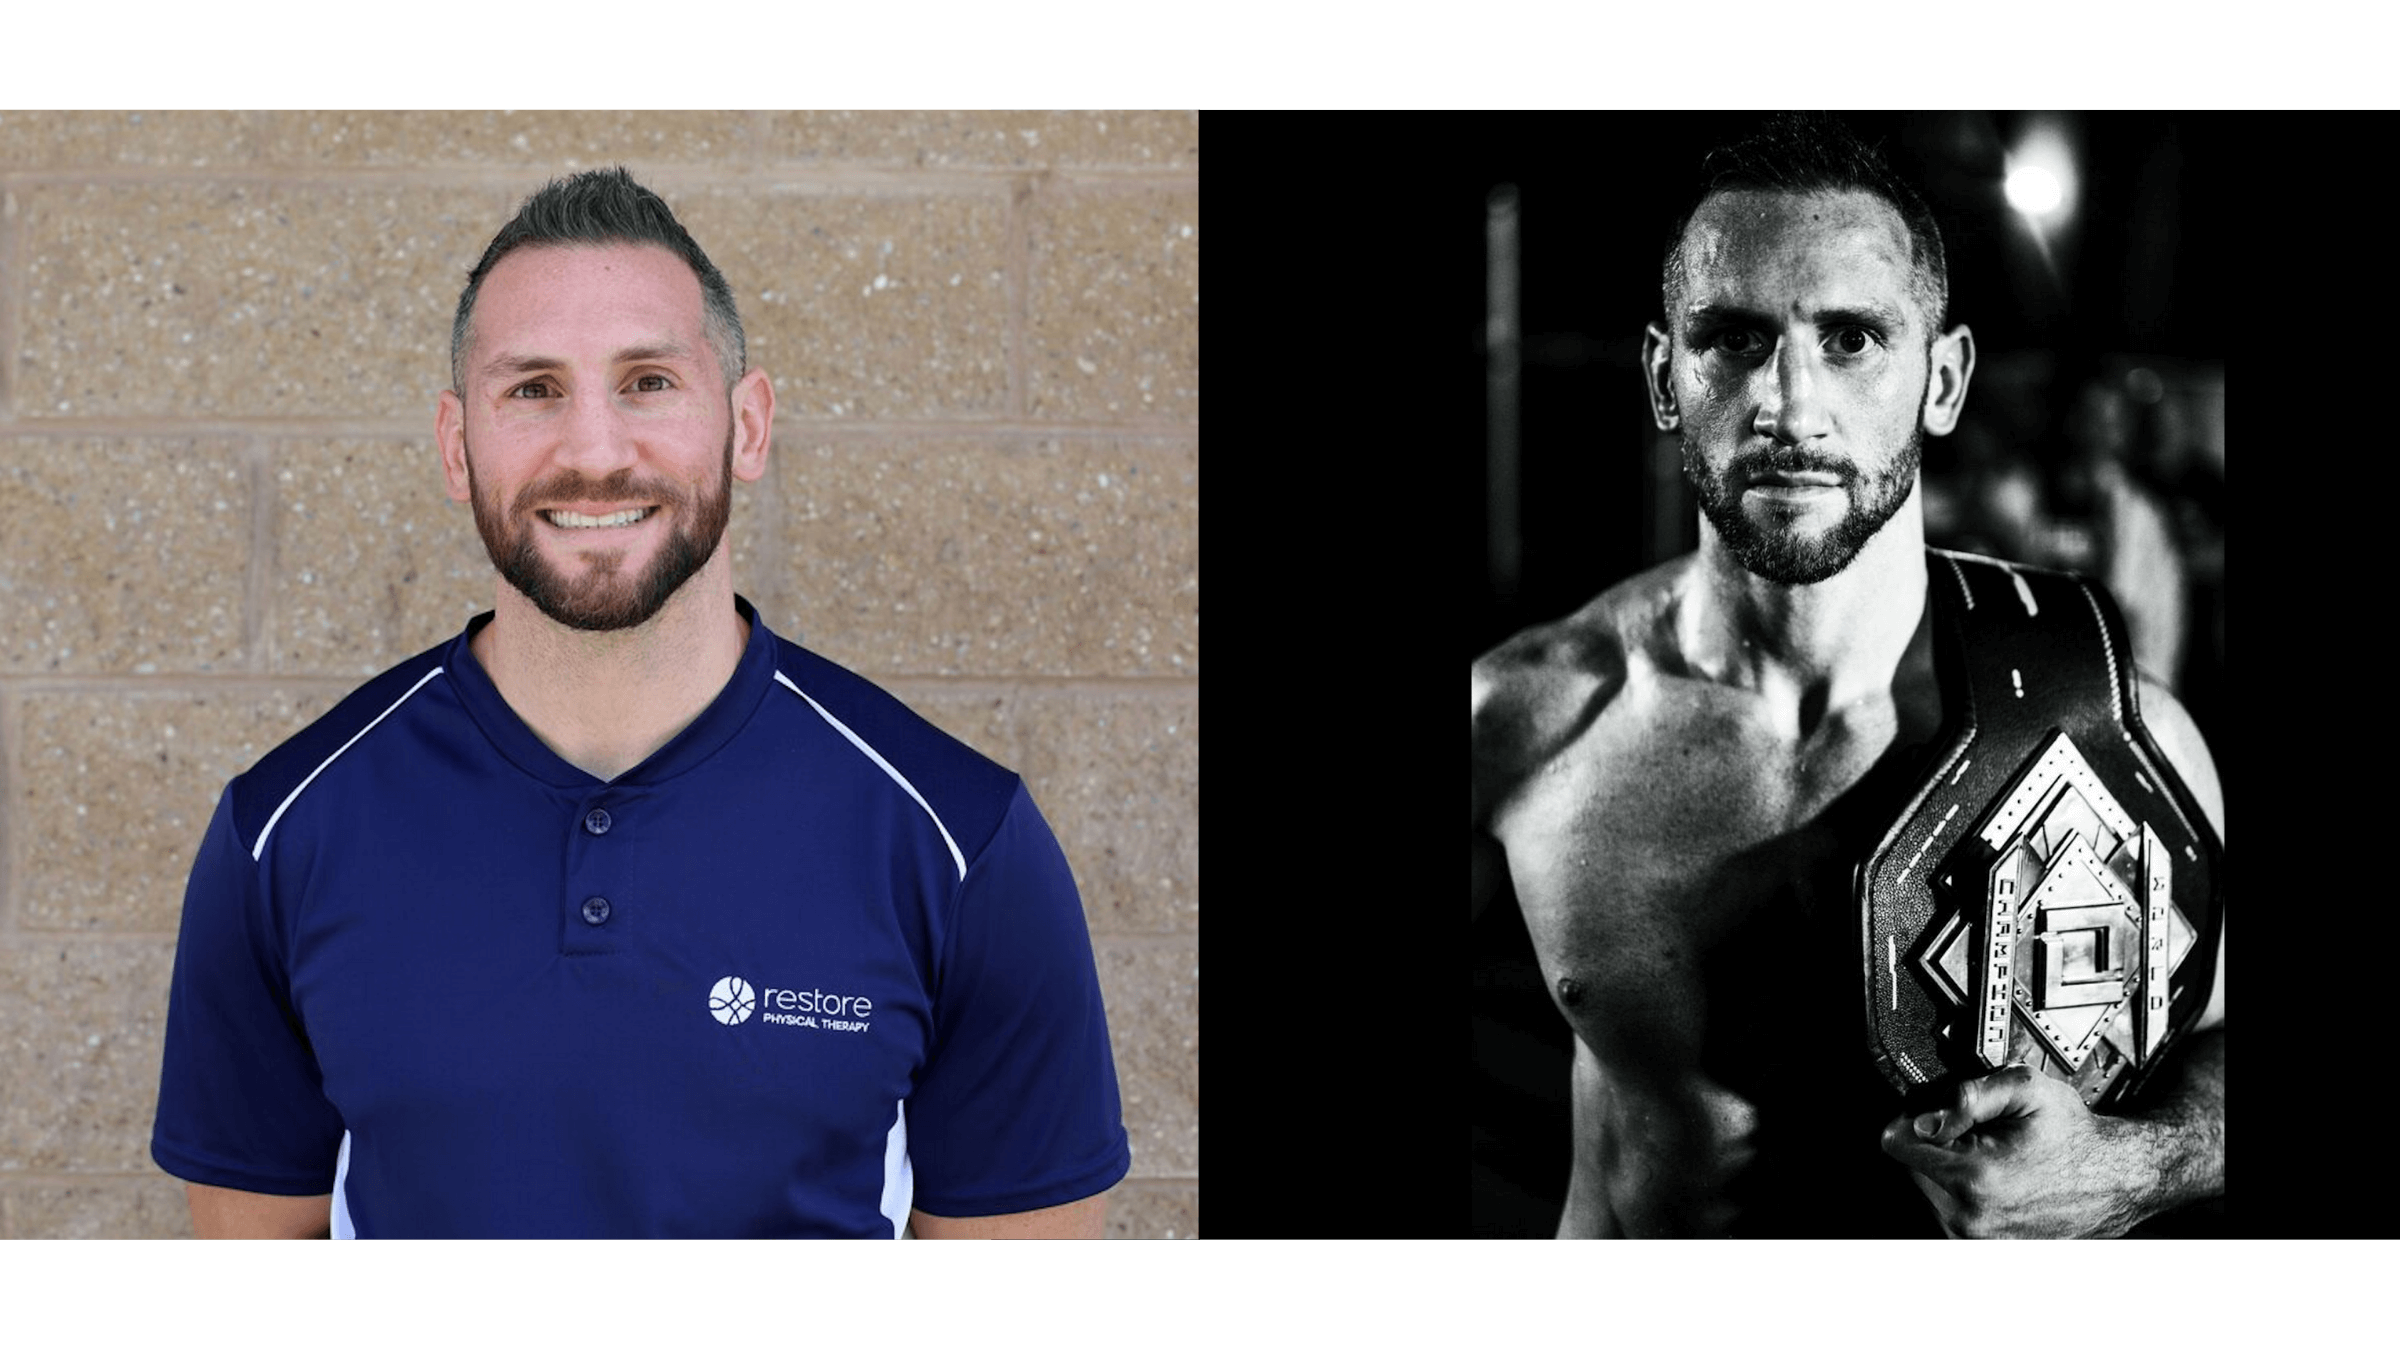 Ross Levine is a physical therapist and a martial arts champion.